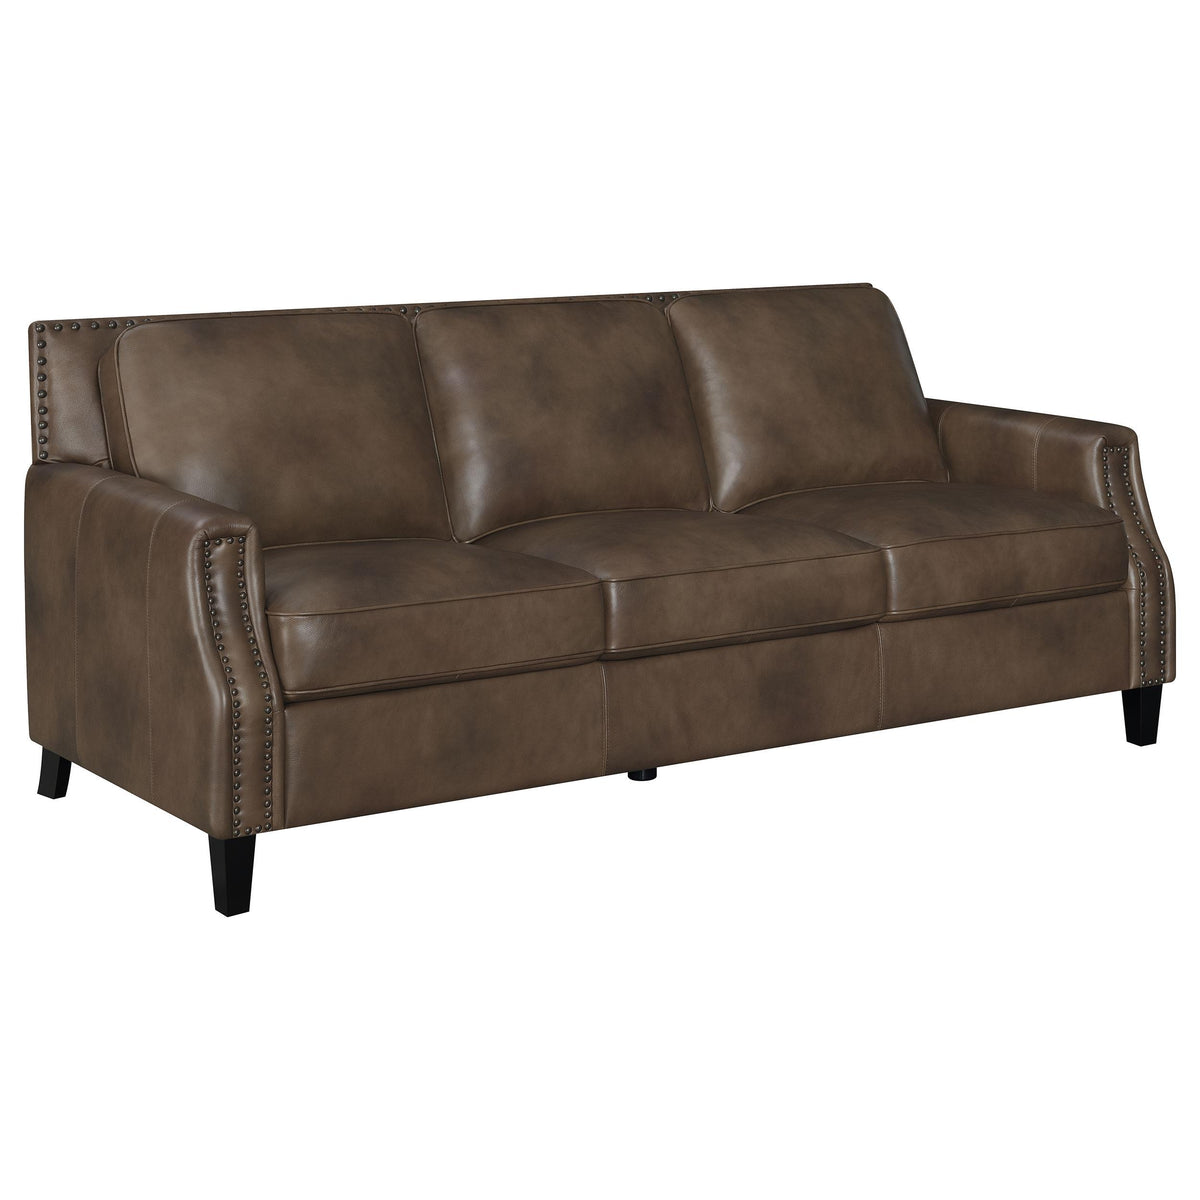 Leaton Upholstered Recessed Arms Sofa Brown Sugar Leaton Upholstered Recessed Arms Sofa Brown Sugar Half Price Furniture